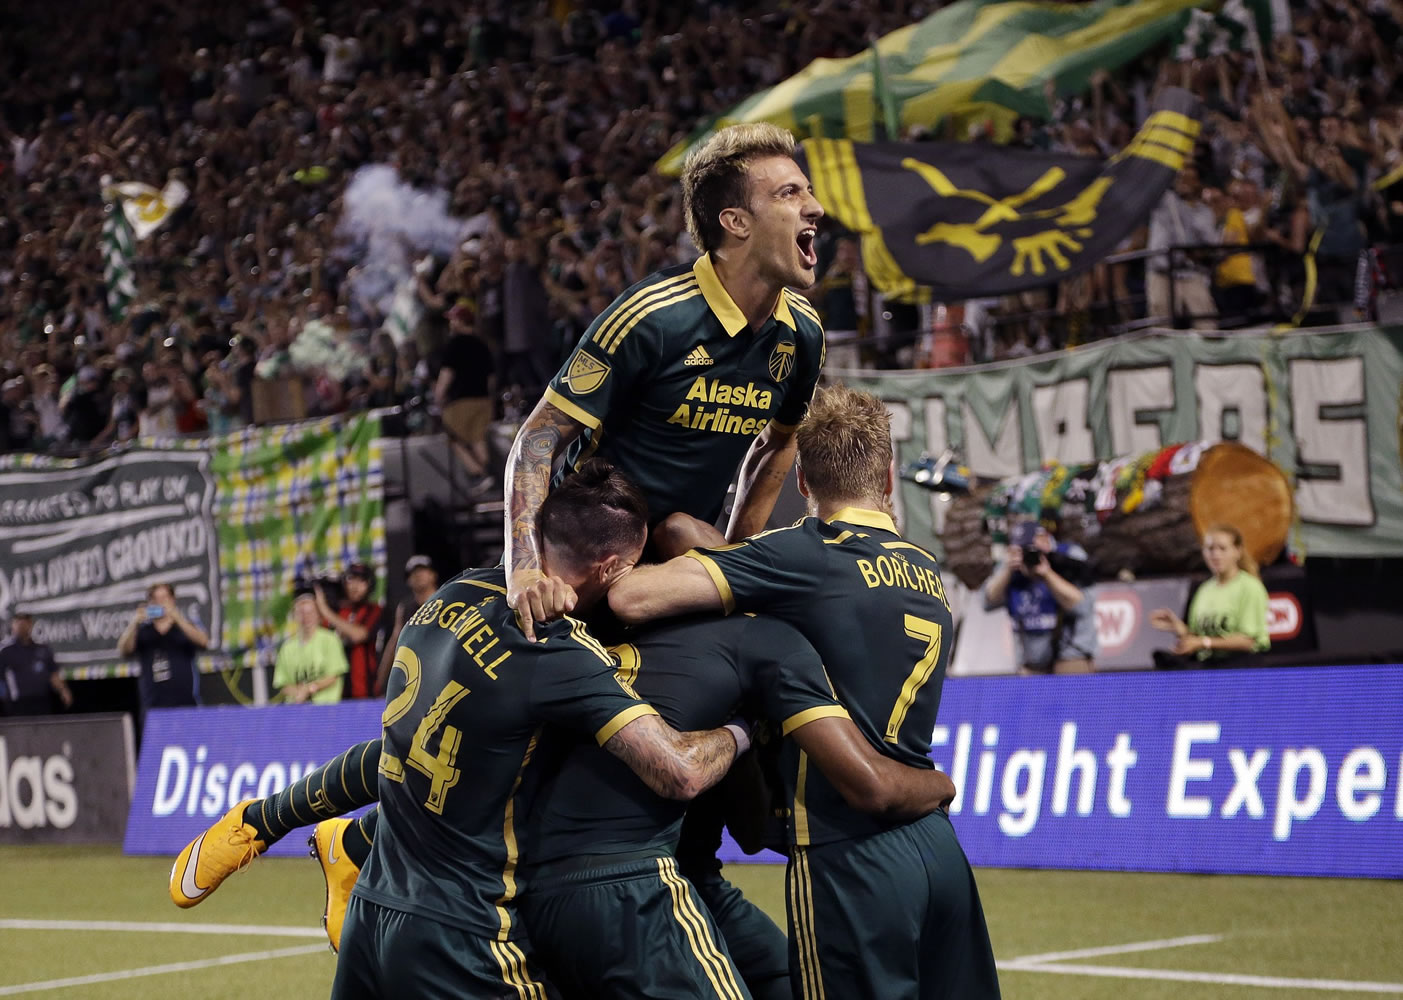 Portland Timbers forward Maximiliano Urruti leaps on top of teammates and yells to the fans as they celebrate a goal during the second half of an MLS soccer game against the New England Revolution  in Portland, Ore., Saturday, June 6, 2015.   Portland won 2-0.